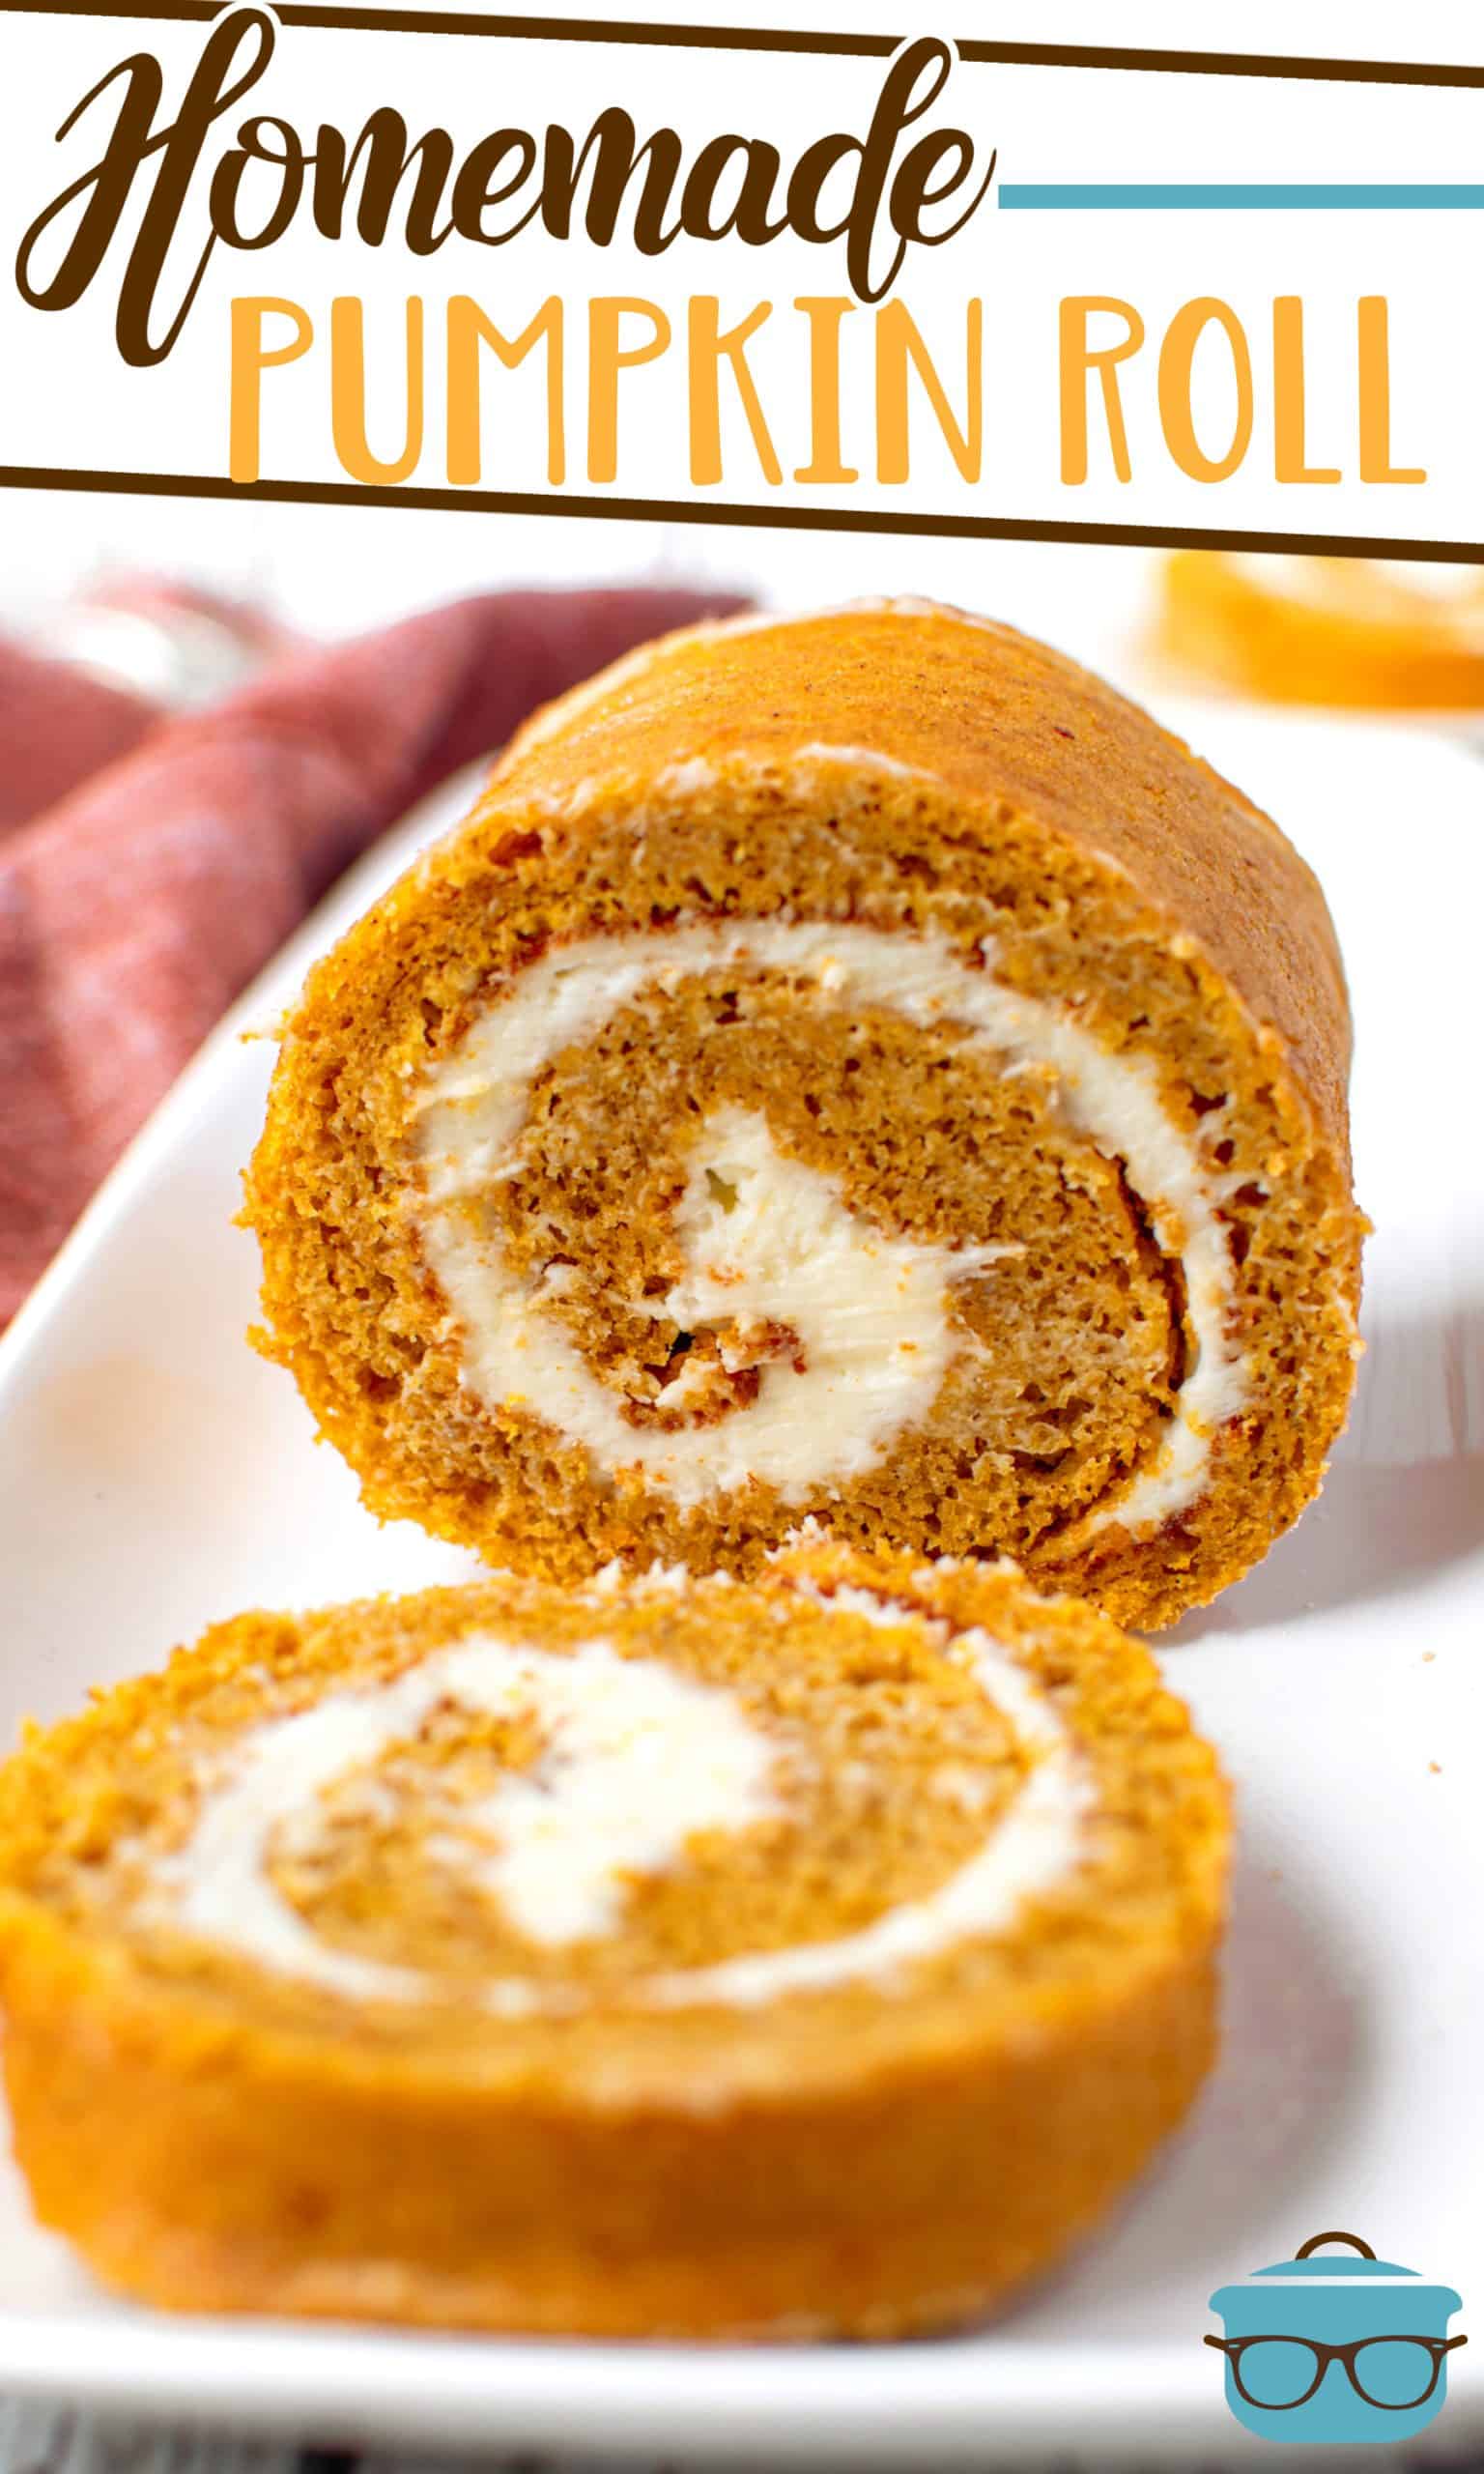 Homemade Pumpkin Roll recipe from The Country Cook. Pumpkin roll sliced to show inside. 